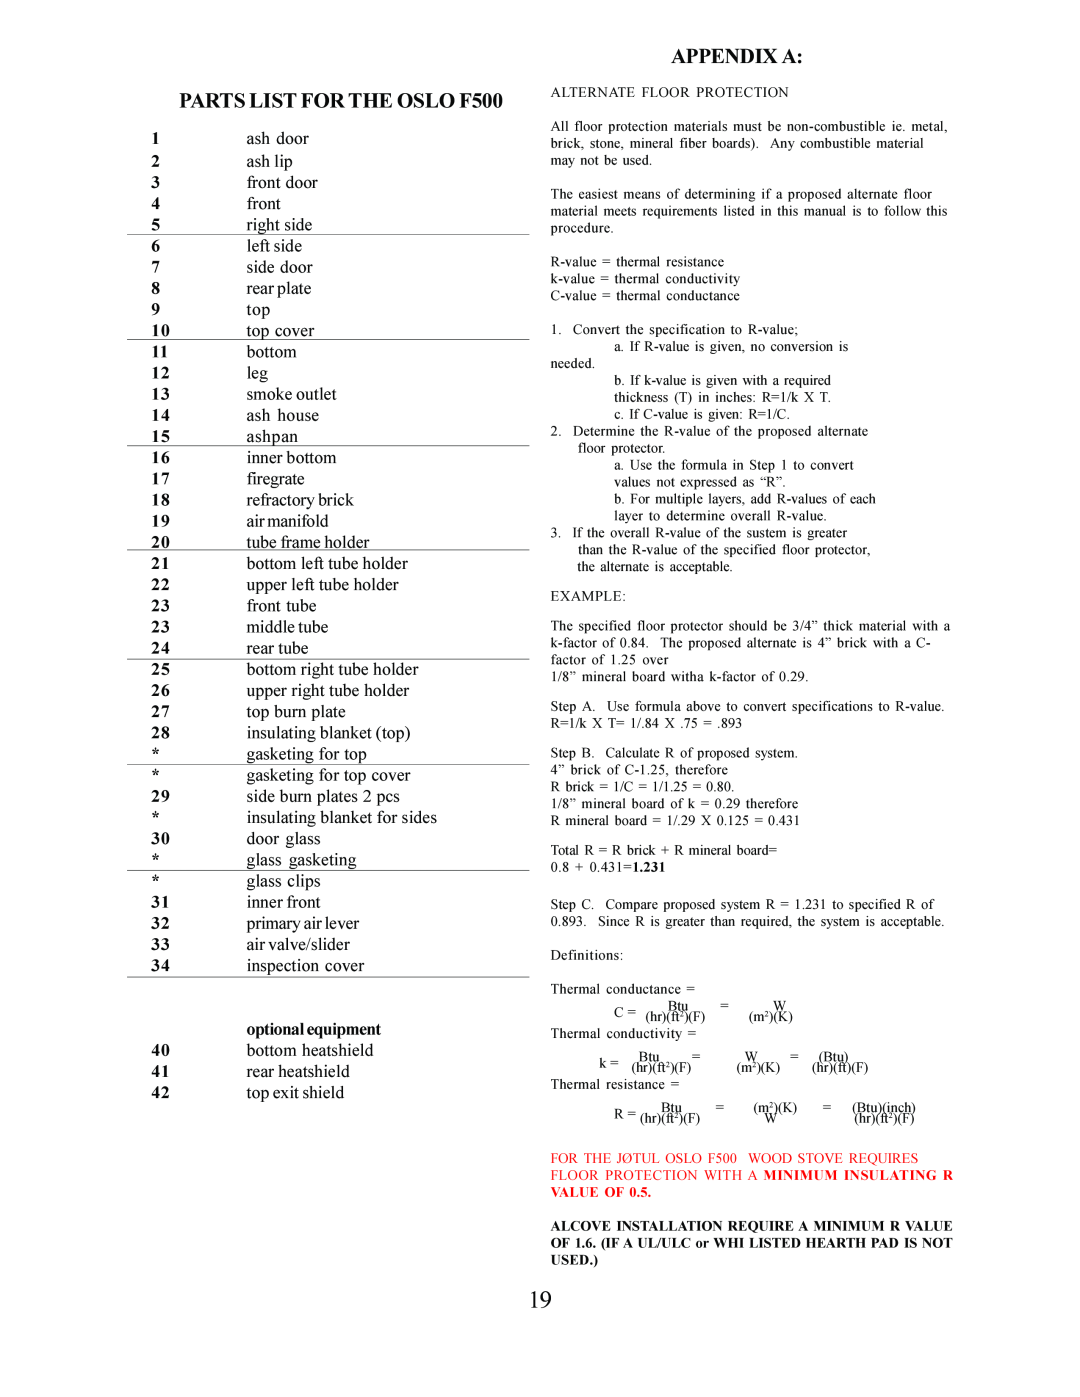 Jotul F 500 operating instructions PARTS LIST FOR THE OSLO F500, Appendix A, optional equipment 